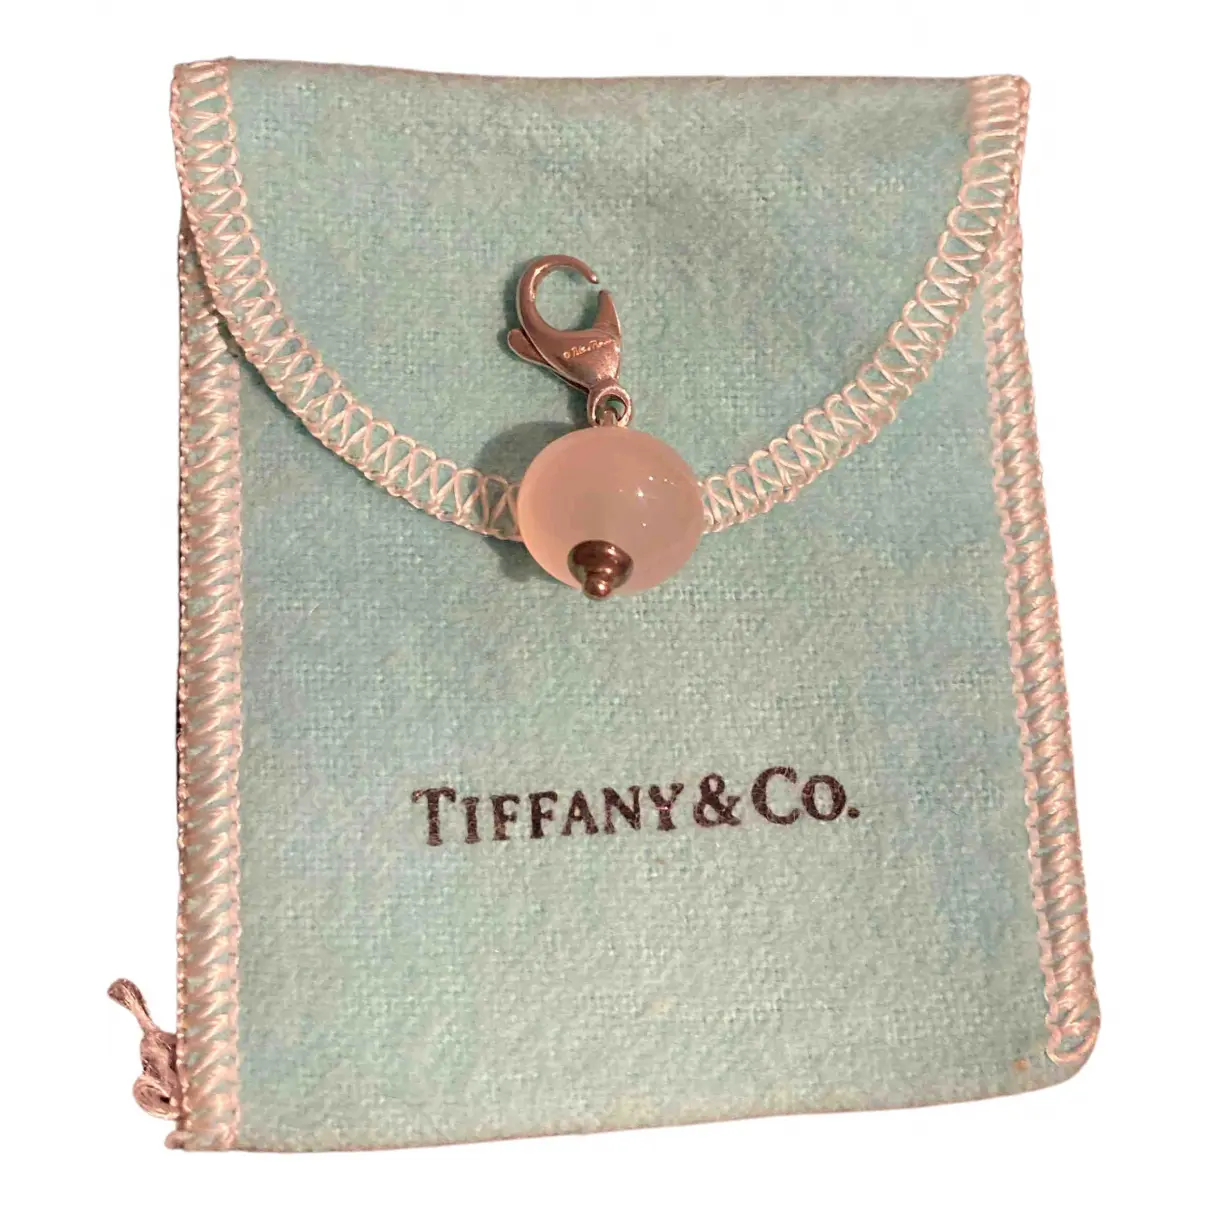 Buy Tiffany & Co Paloma Picasso silver pendant online